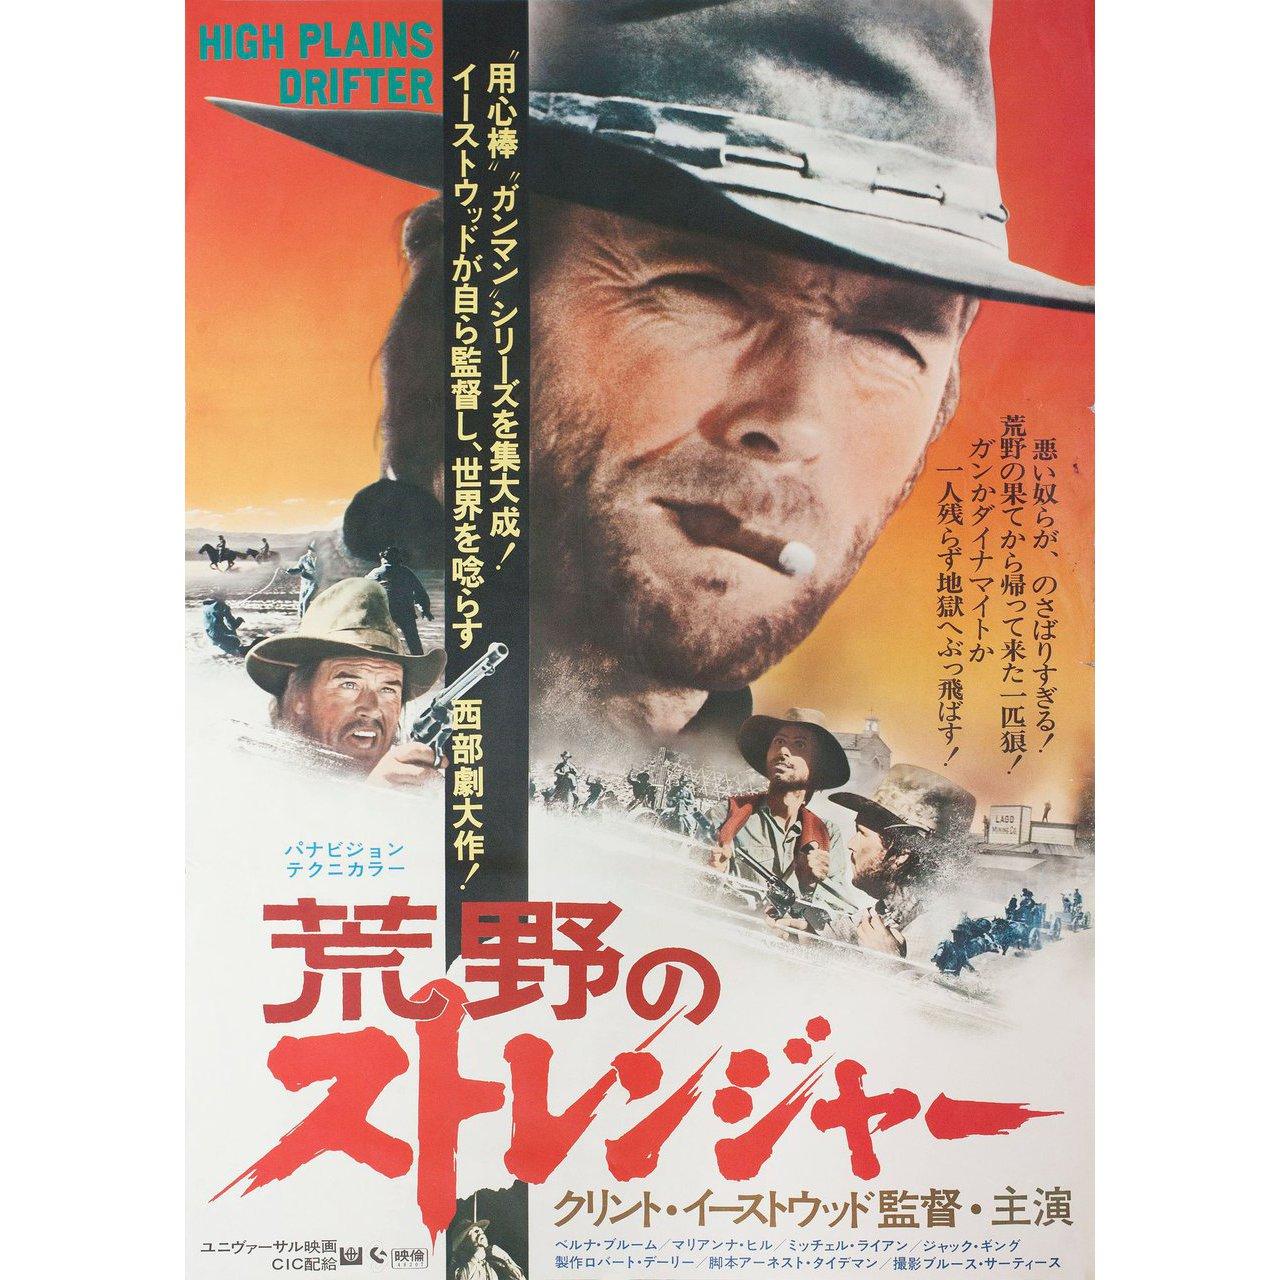 Original 1973 Japanese B3 poster for the film High Plains Drifter directed by Clint Eastwood with Clint Eastwood / Verna Bloom / Marianna Hill / Mitch Ryan. Very good-fine condition, rolled. Please note: the size is stated in inches and the actual